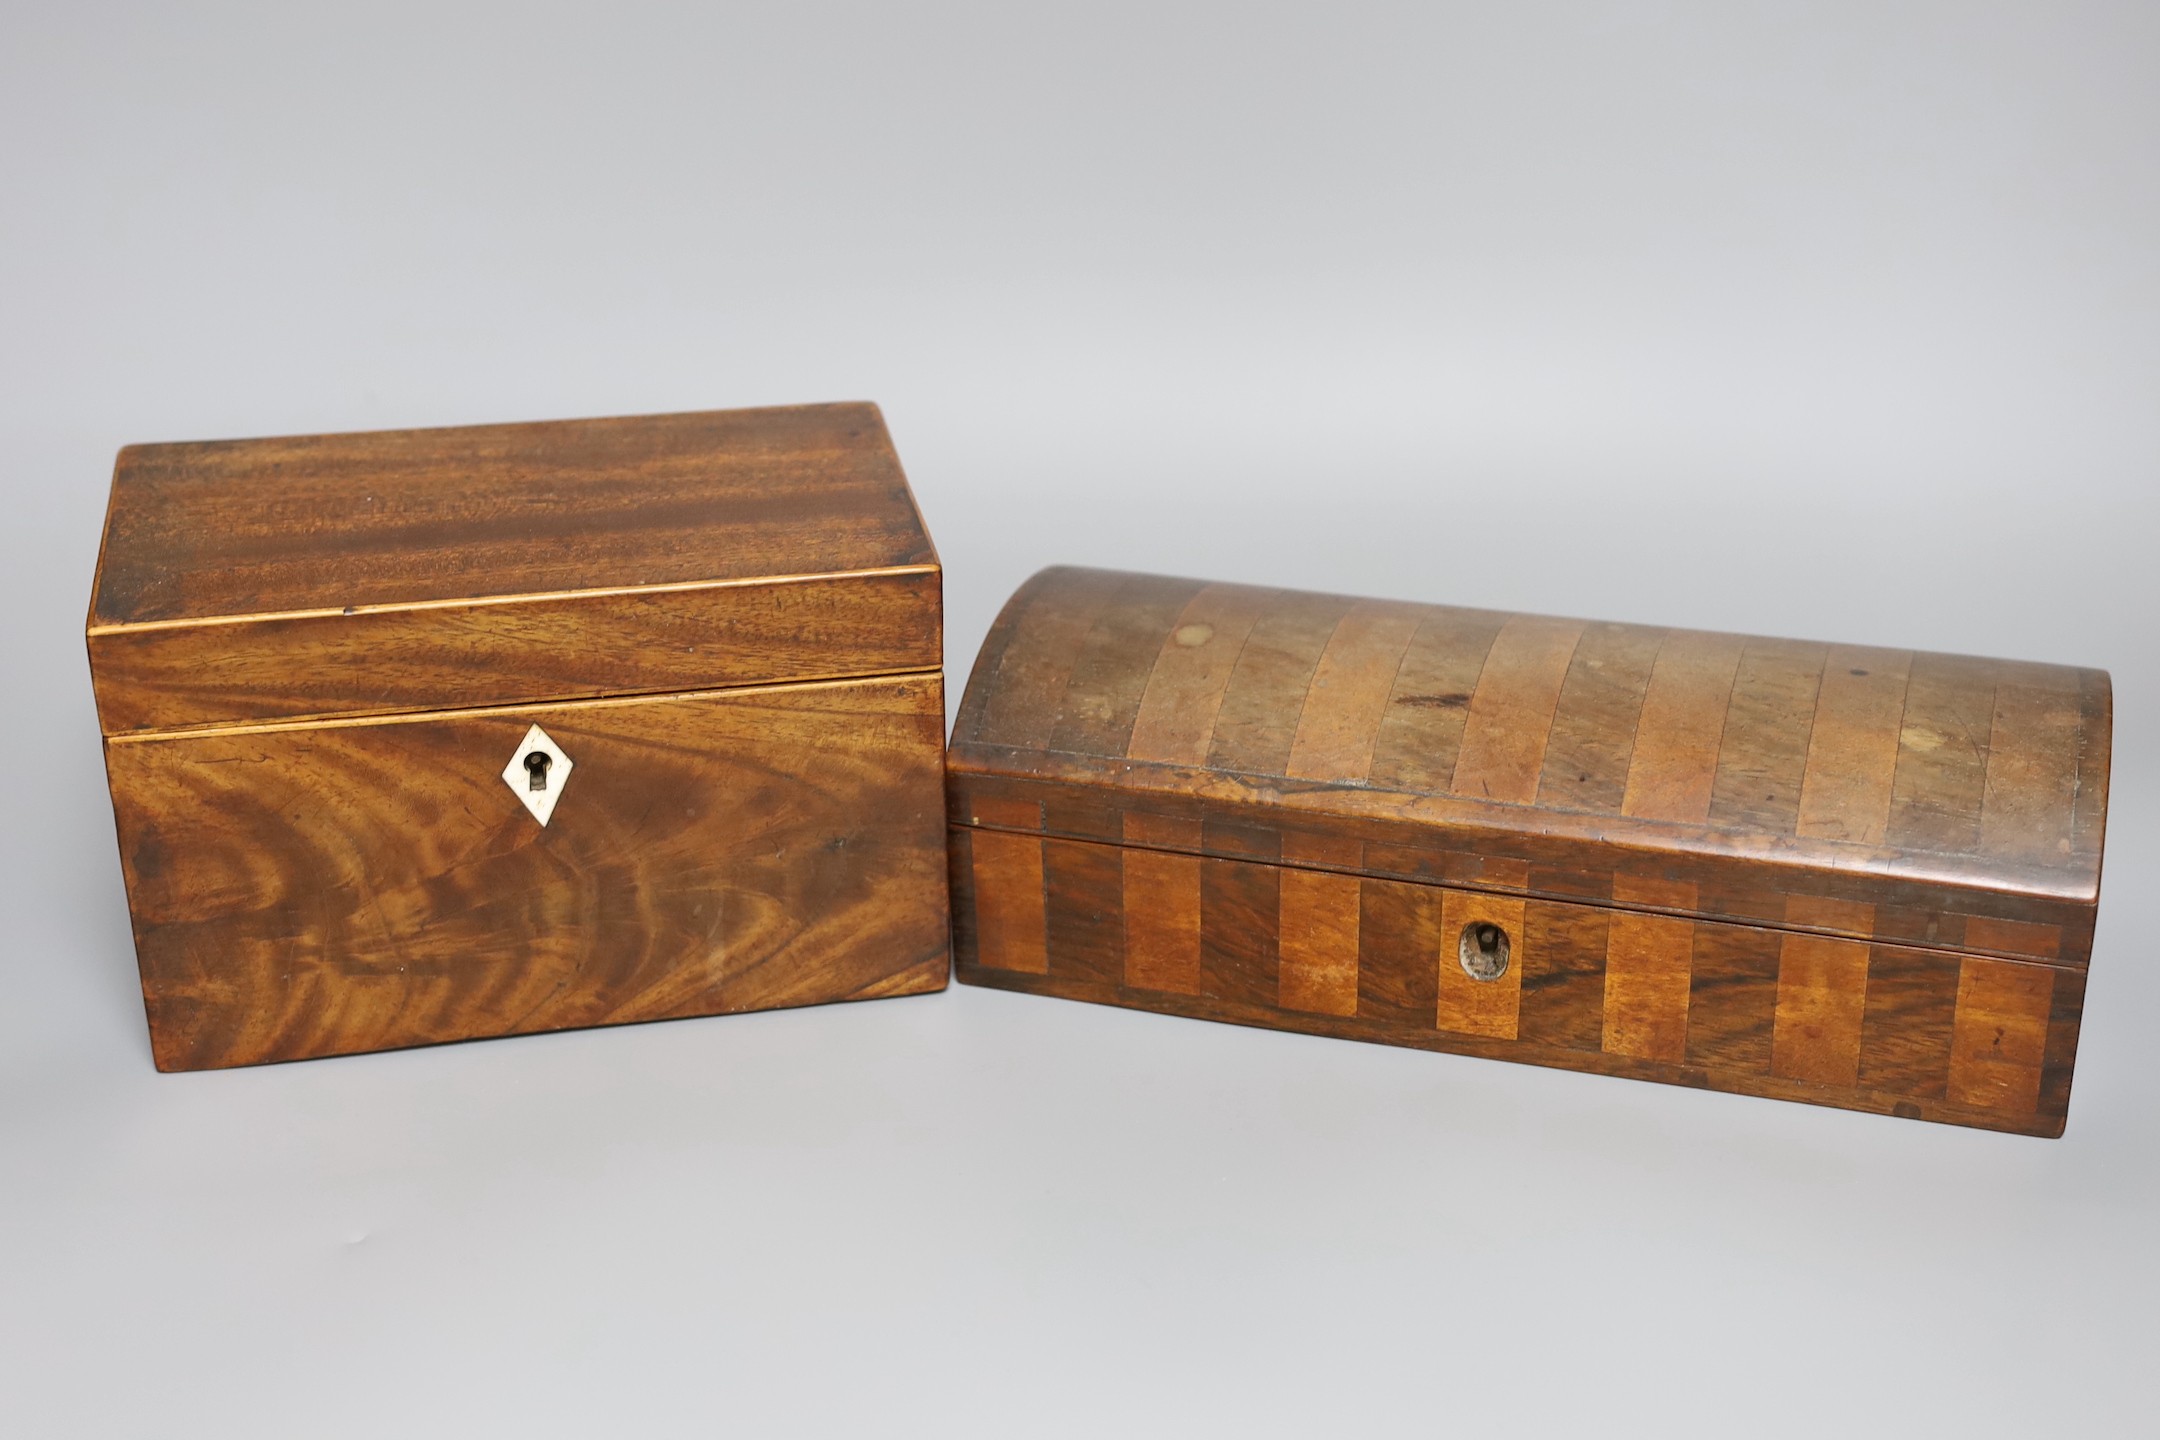 A George III inlaid mahogany tea caddy, a Victorian satinwood and rosewood domed topped glove box, a burr wood circular tray, a George III inlaid mahogany domed topped easel mirror and a pair of turned hardwood cups